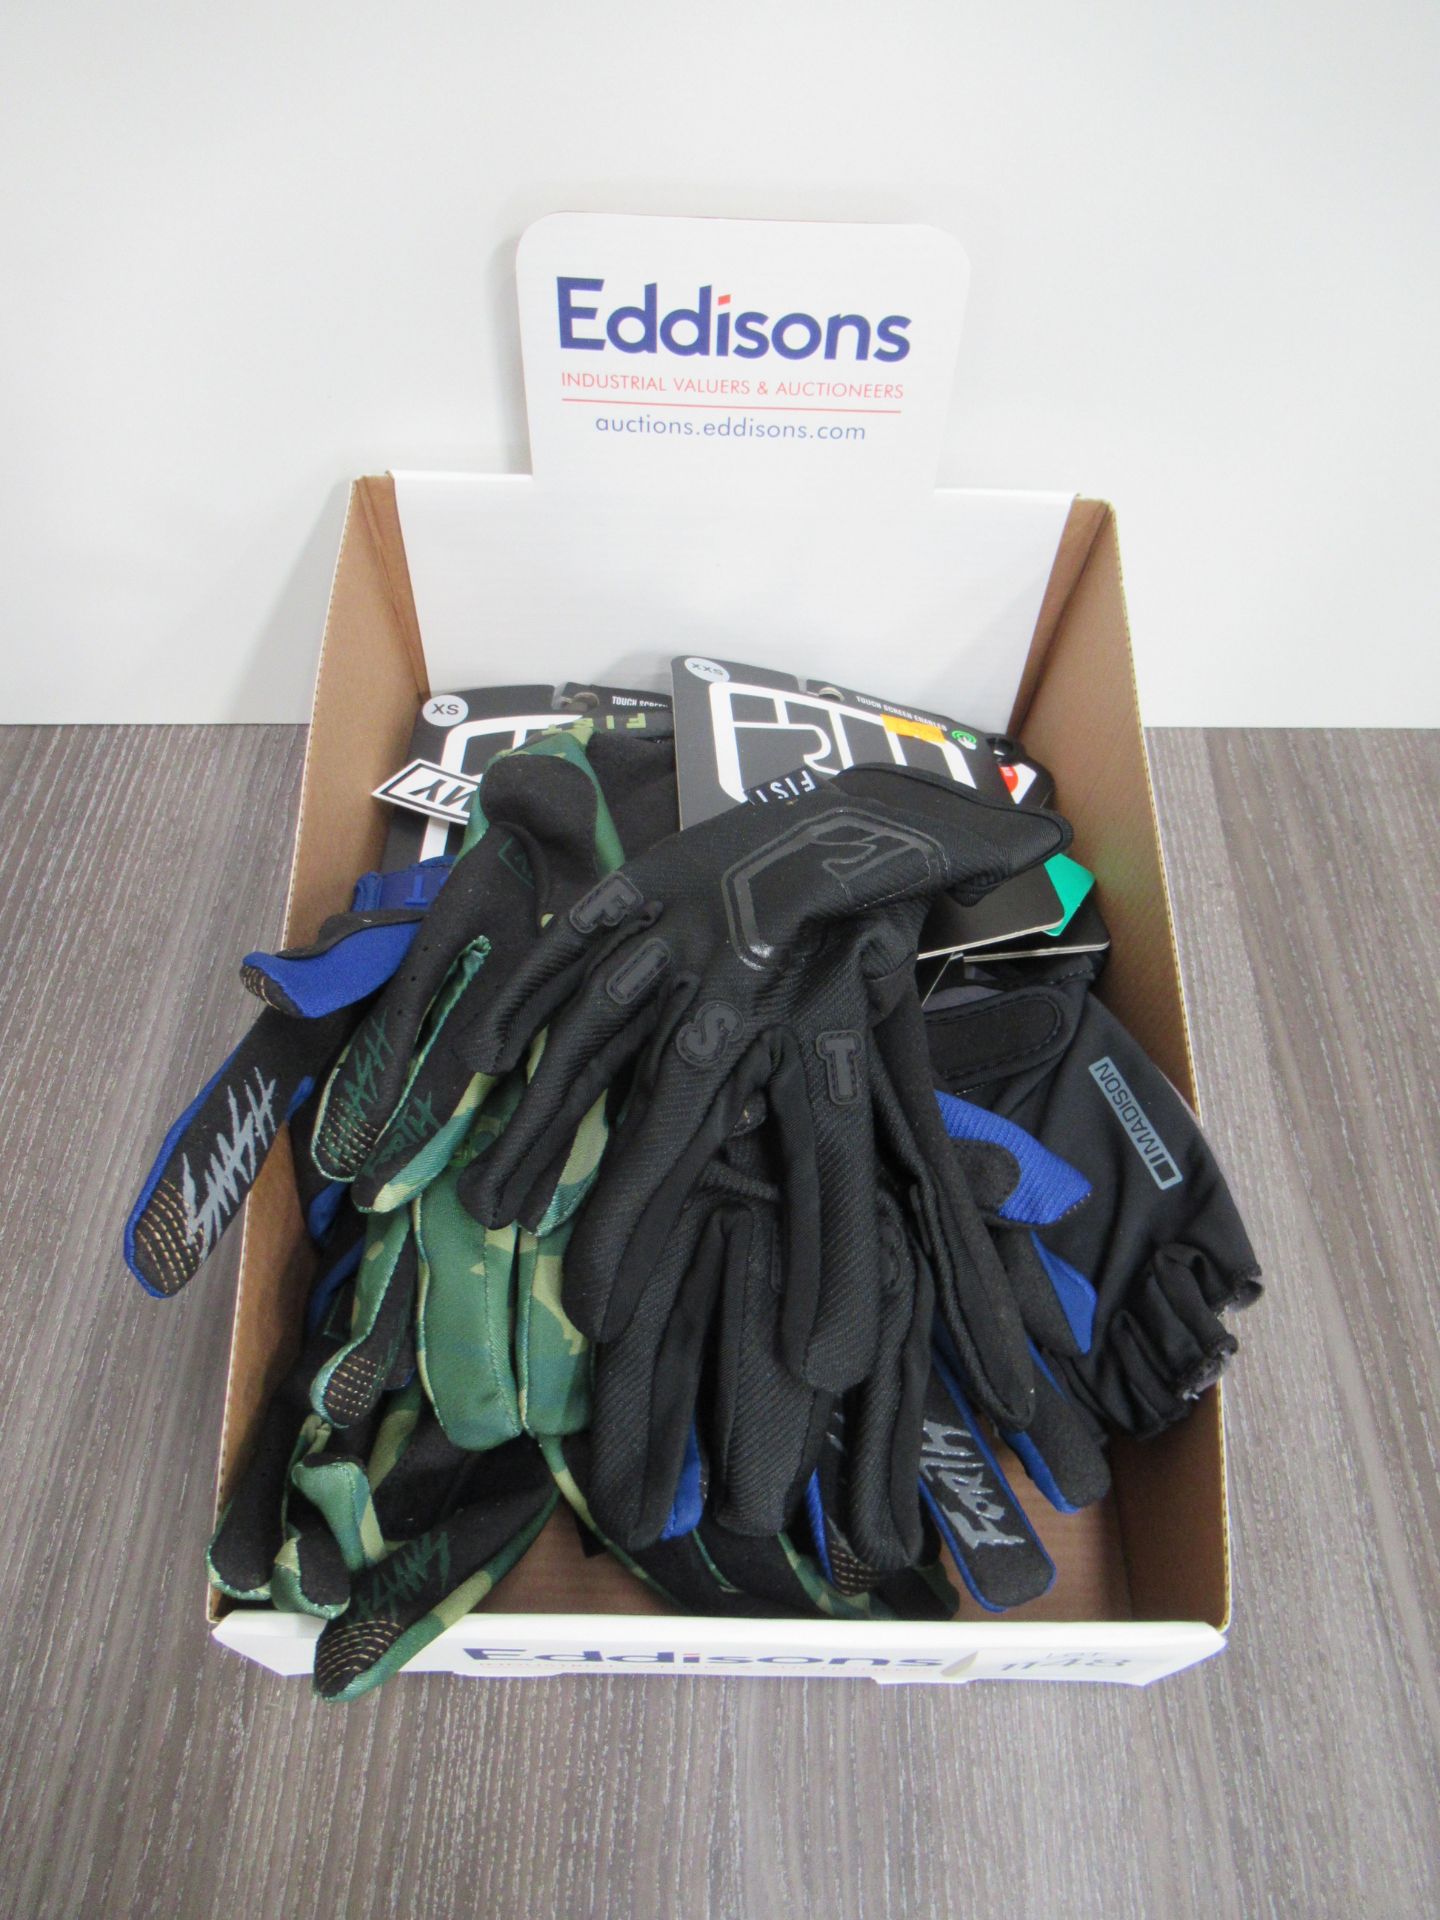 8 x pairs of Gloves - 4 x Madison XS (RRP£14.99 each); 4 x FIST - 3 x XXS and 2 x XS (RRP£32.99)